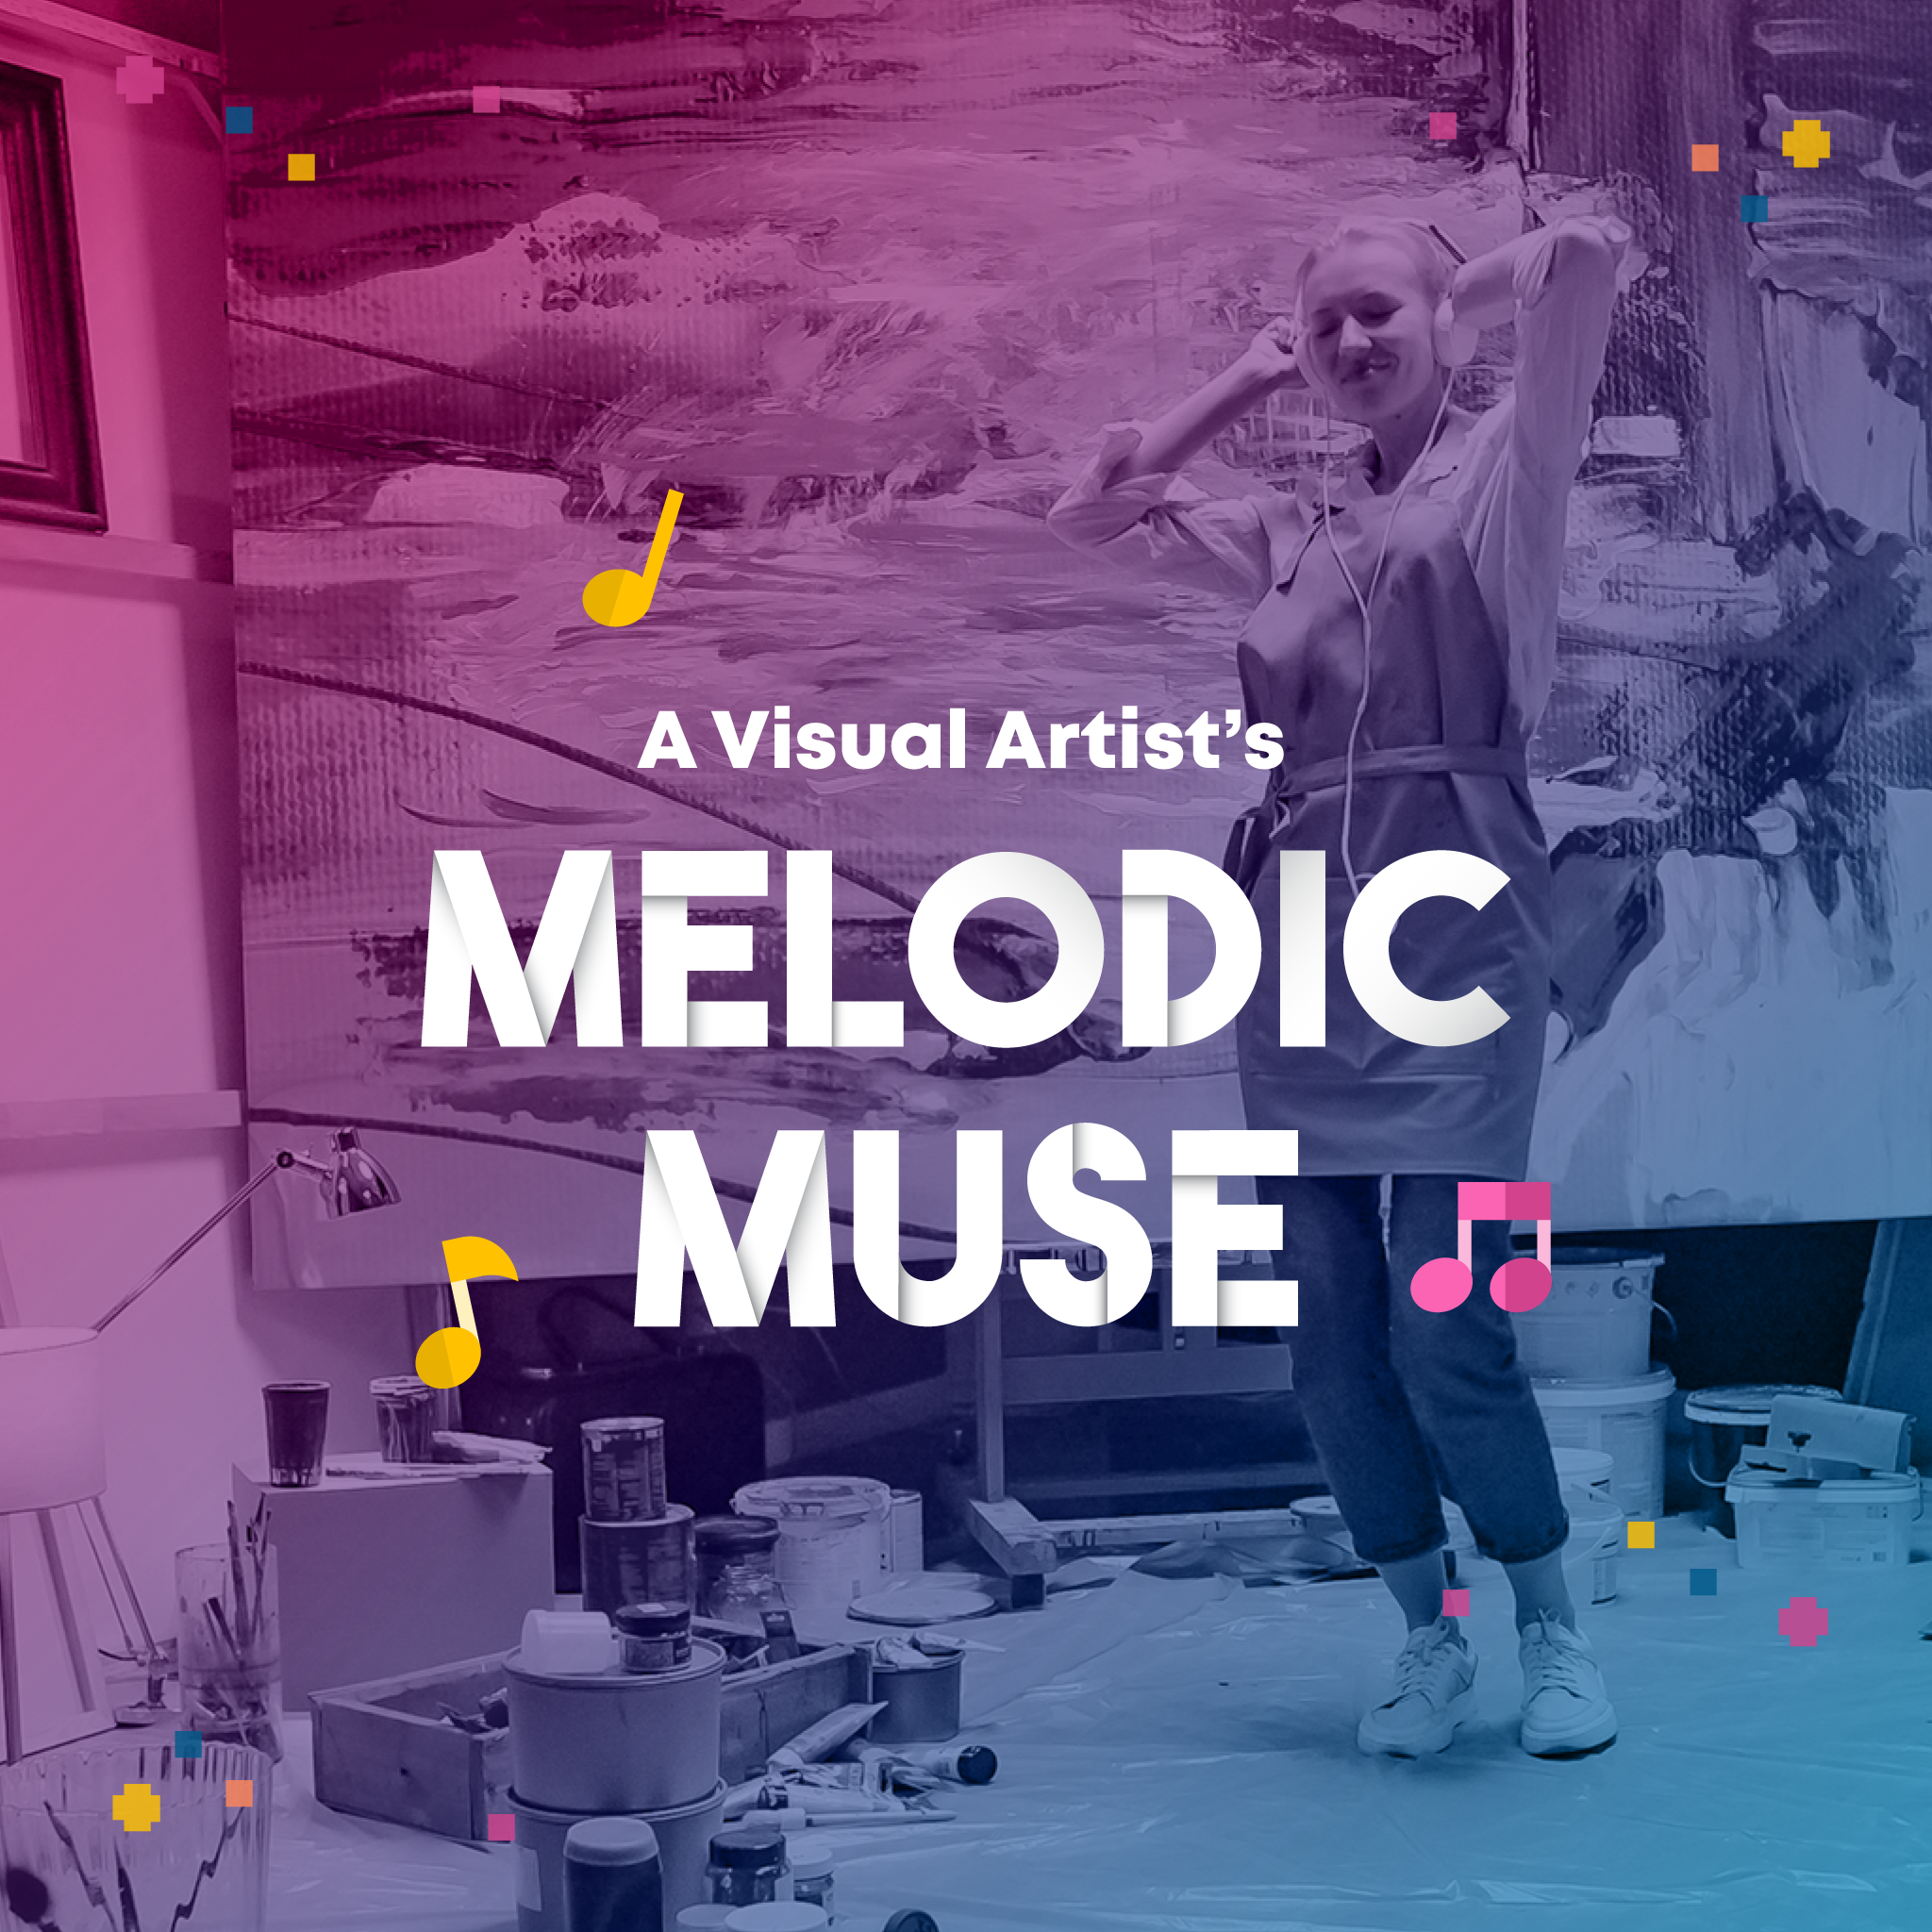 A visual artist's melodic muse